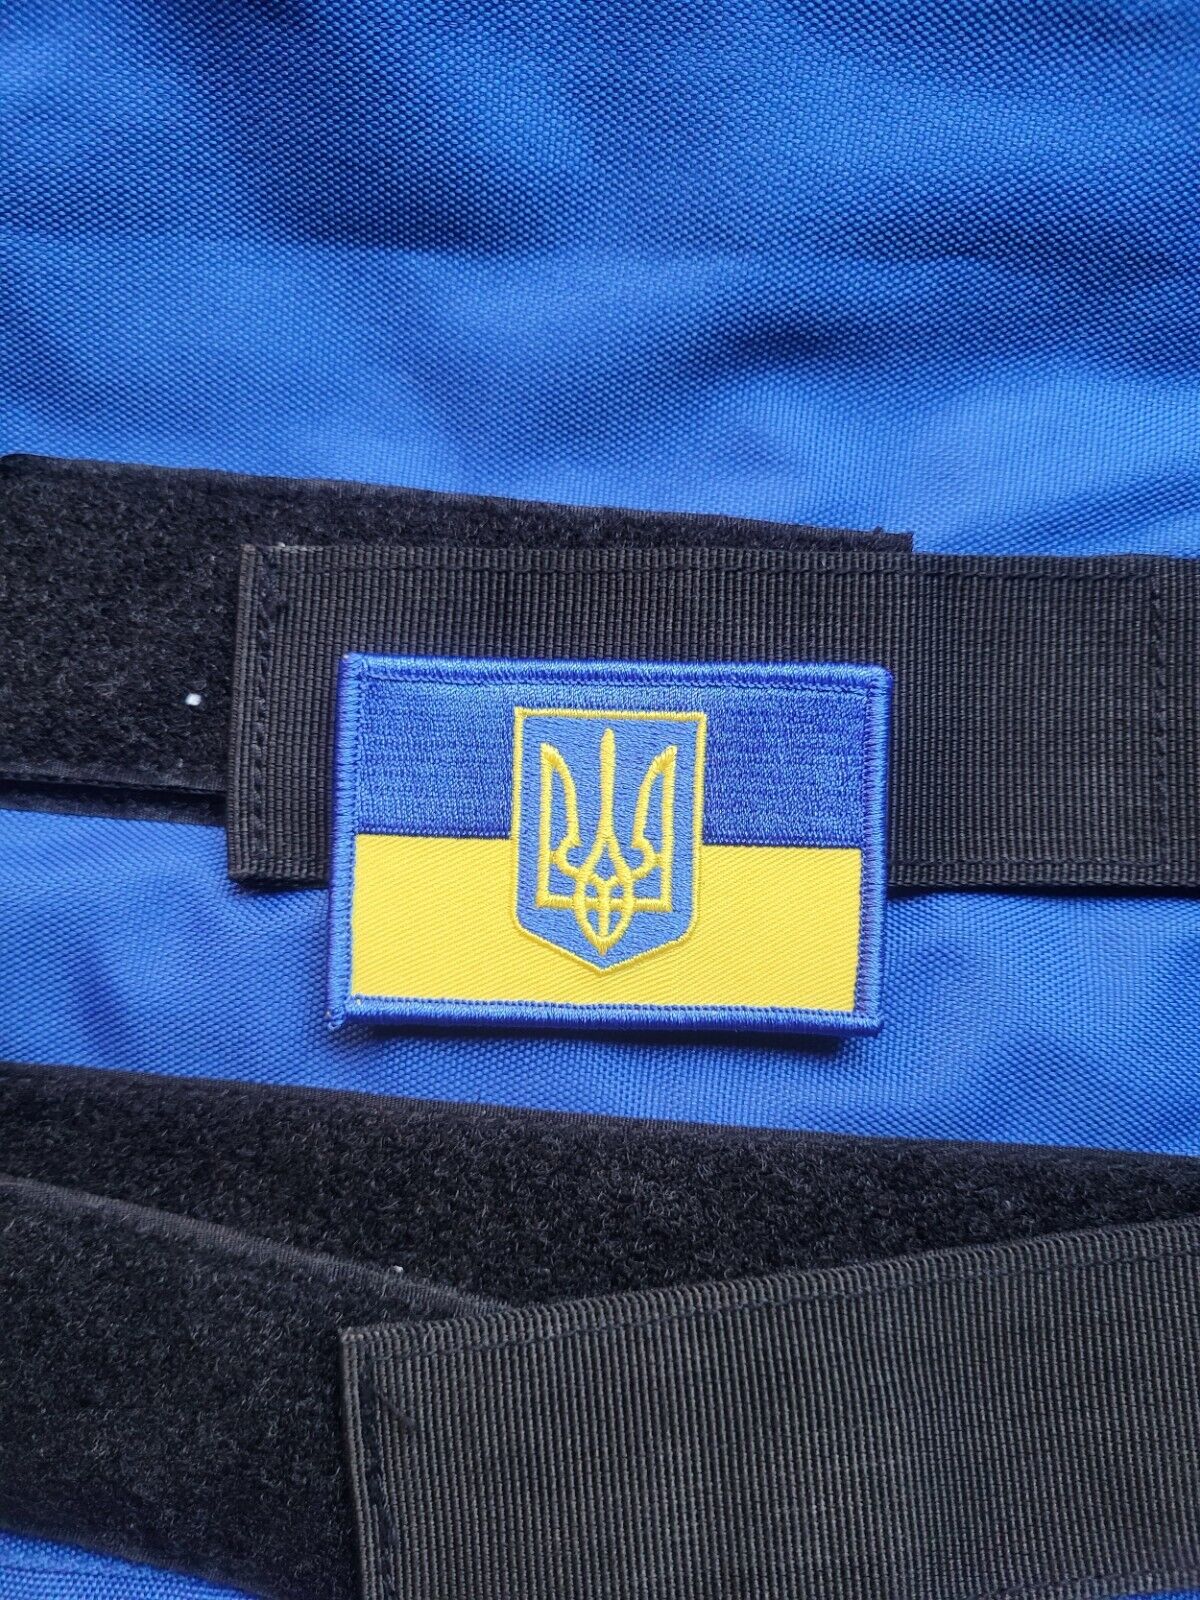 Armed Forces of Ukraine soldier airsoft cosplay morale military flag color patch